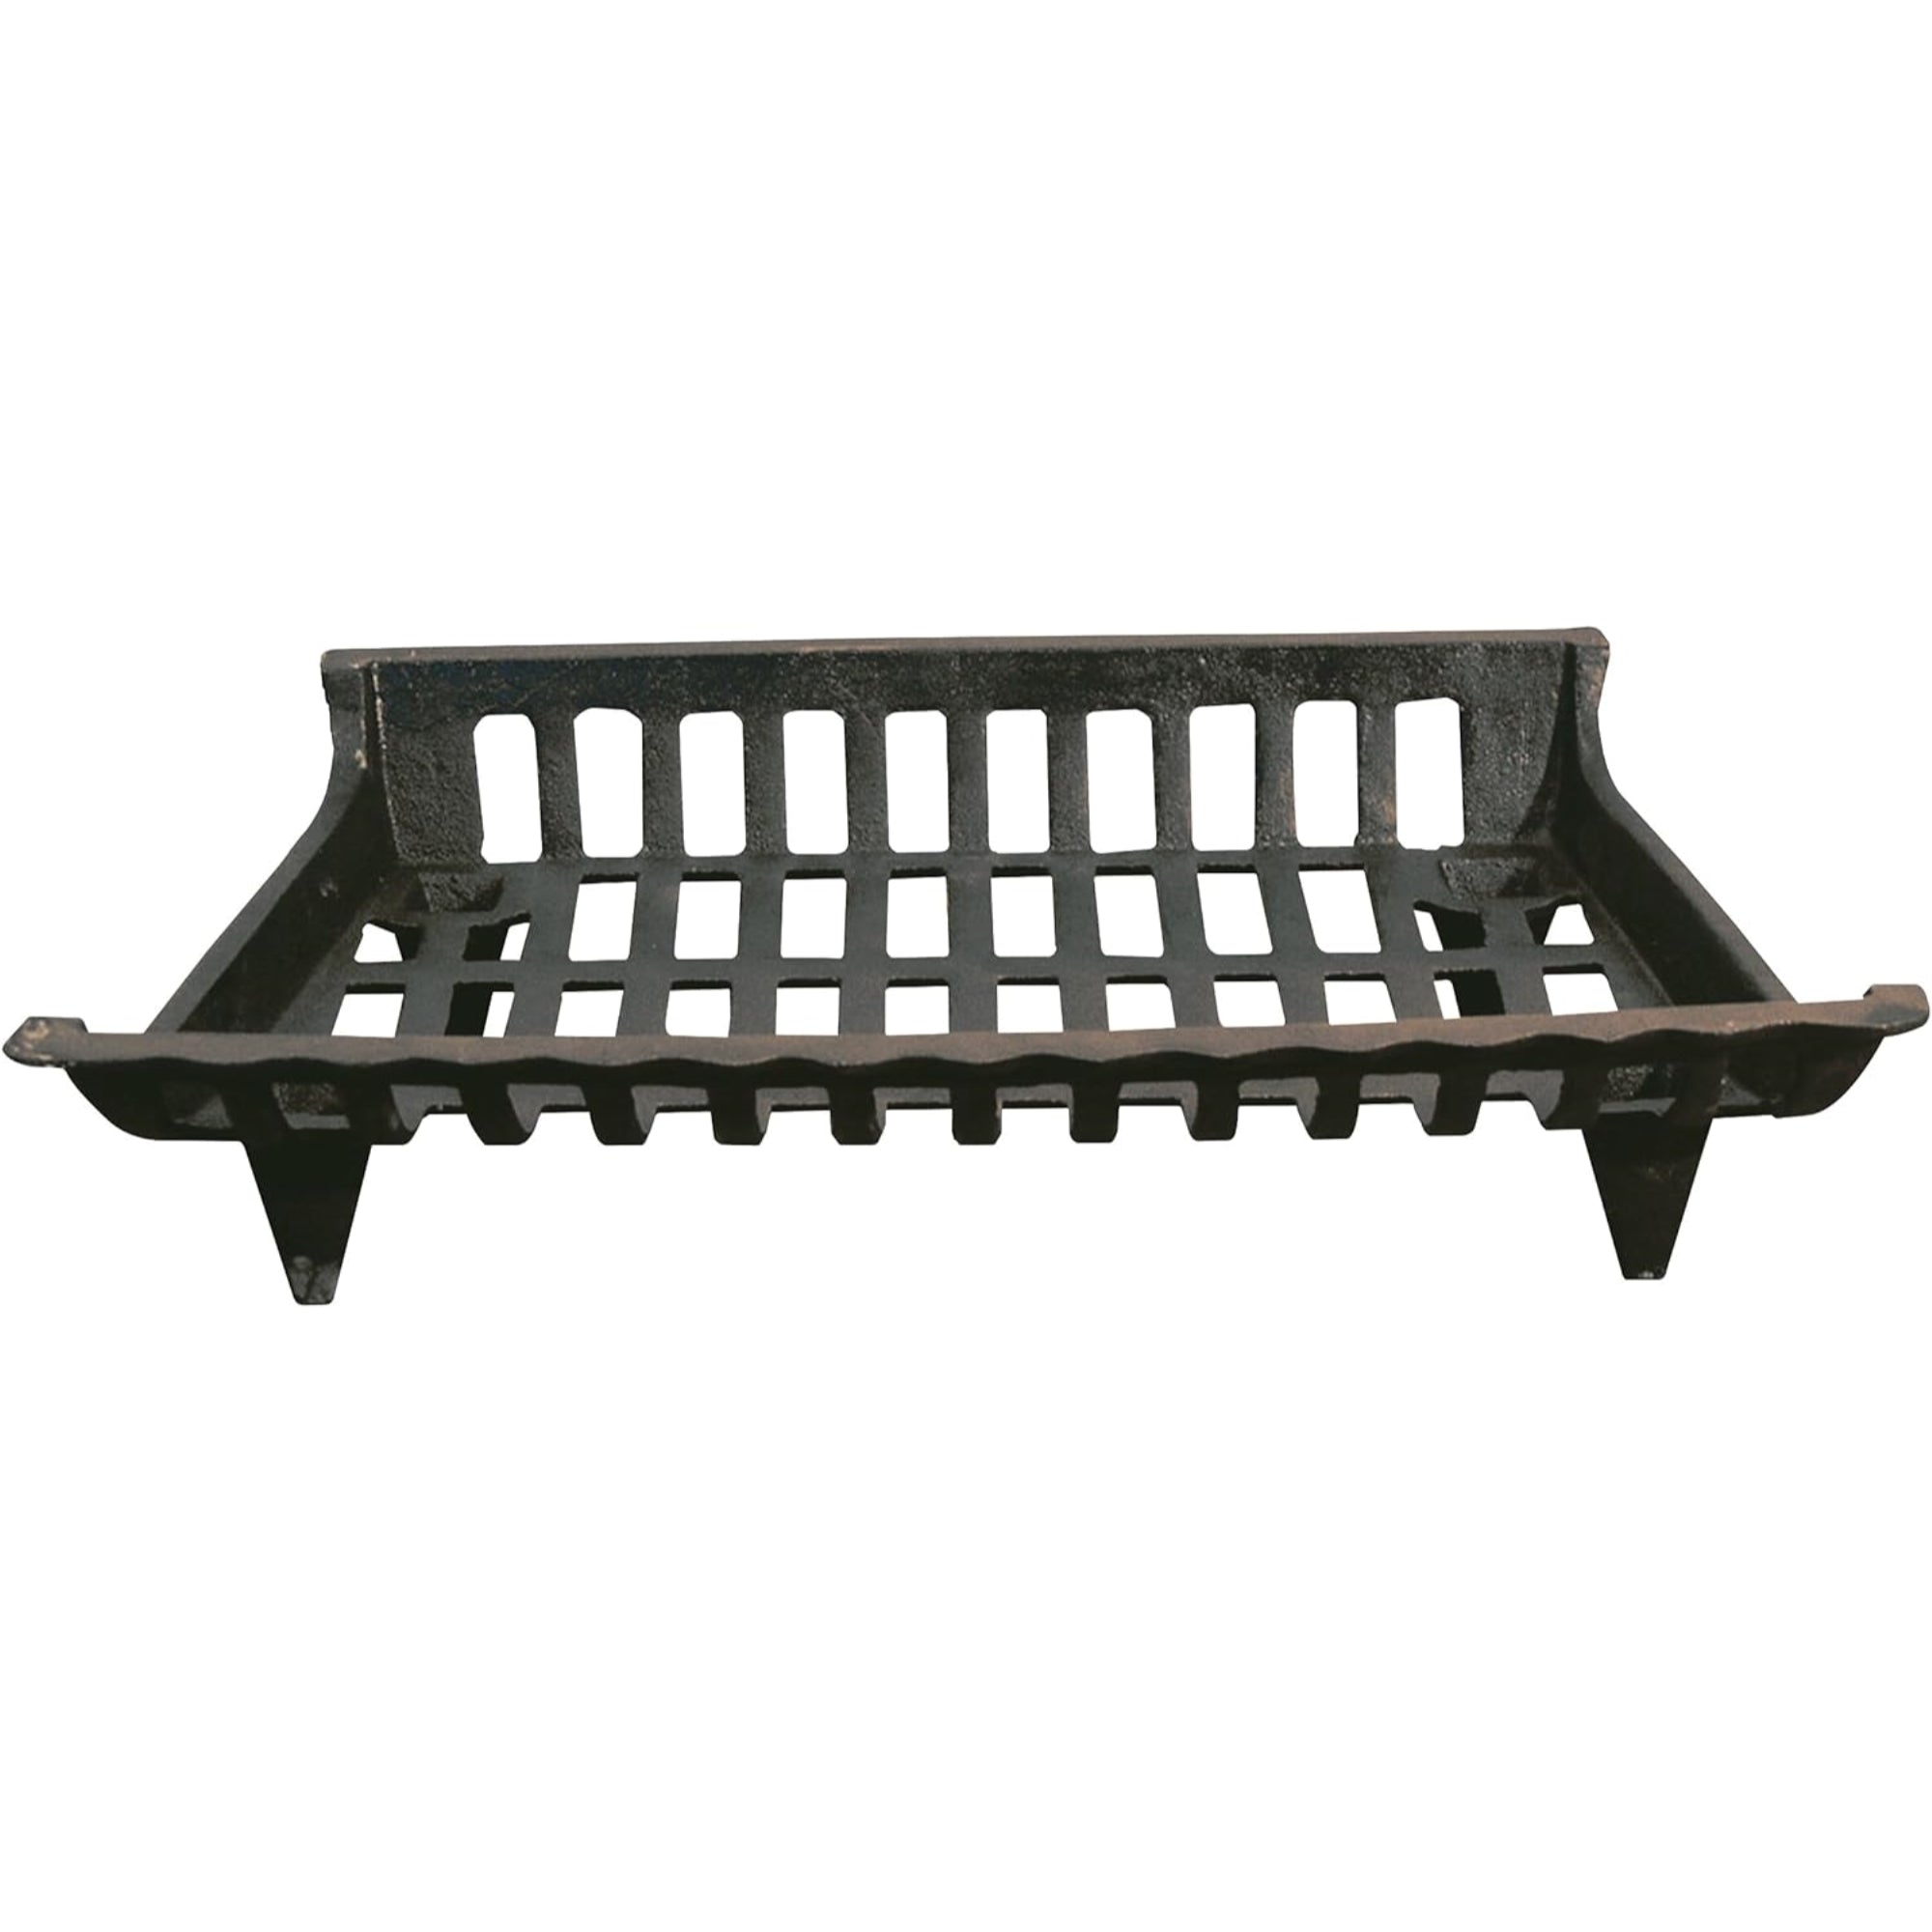 Panacea Cast Iron Grate for Indoor Outdoor Fire Pits and Fireplaces, Black, 24"